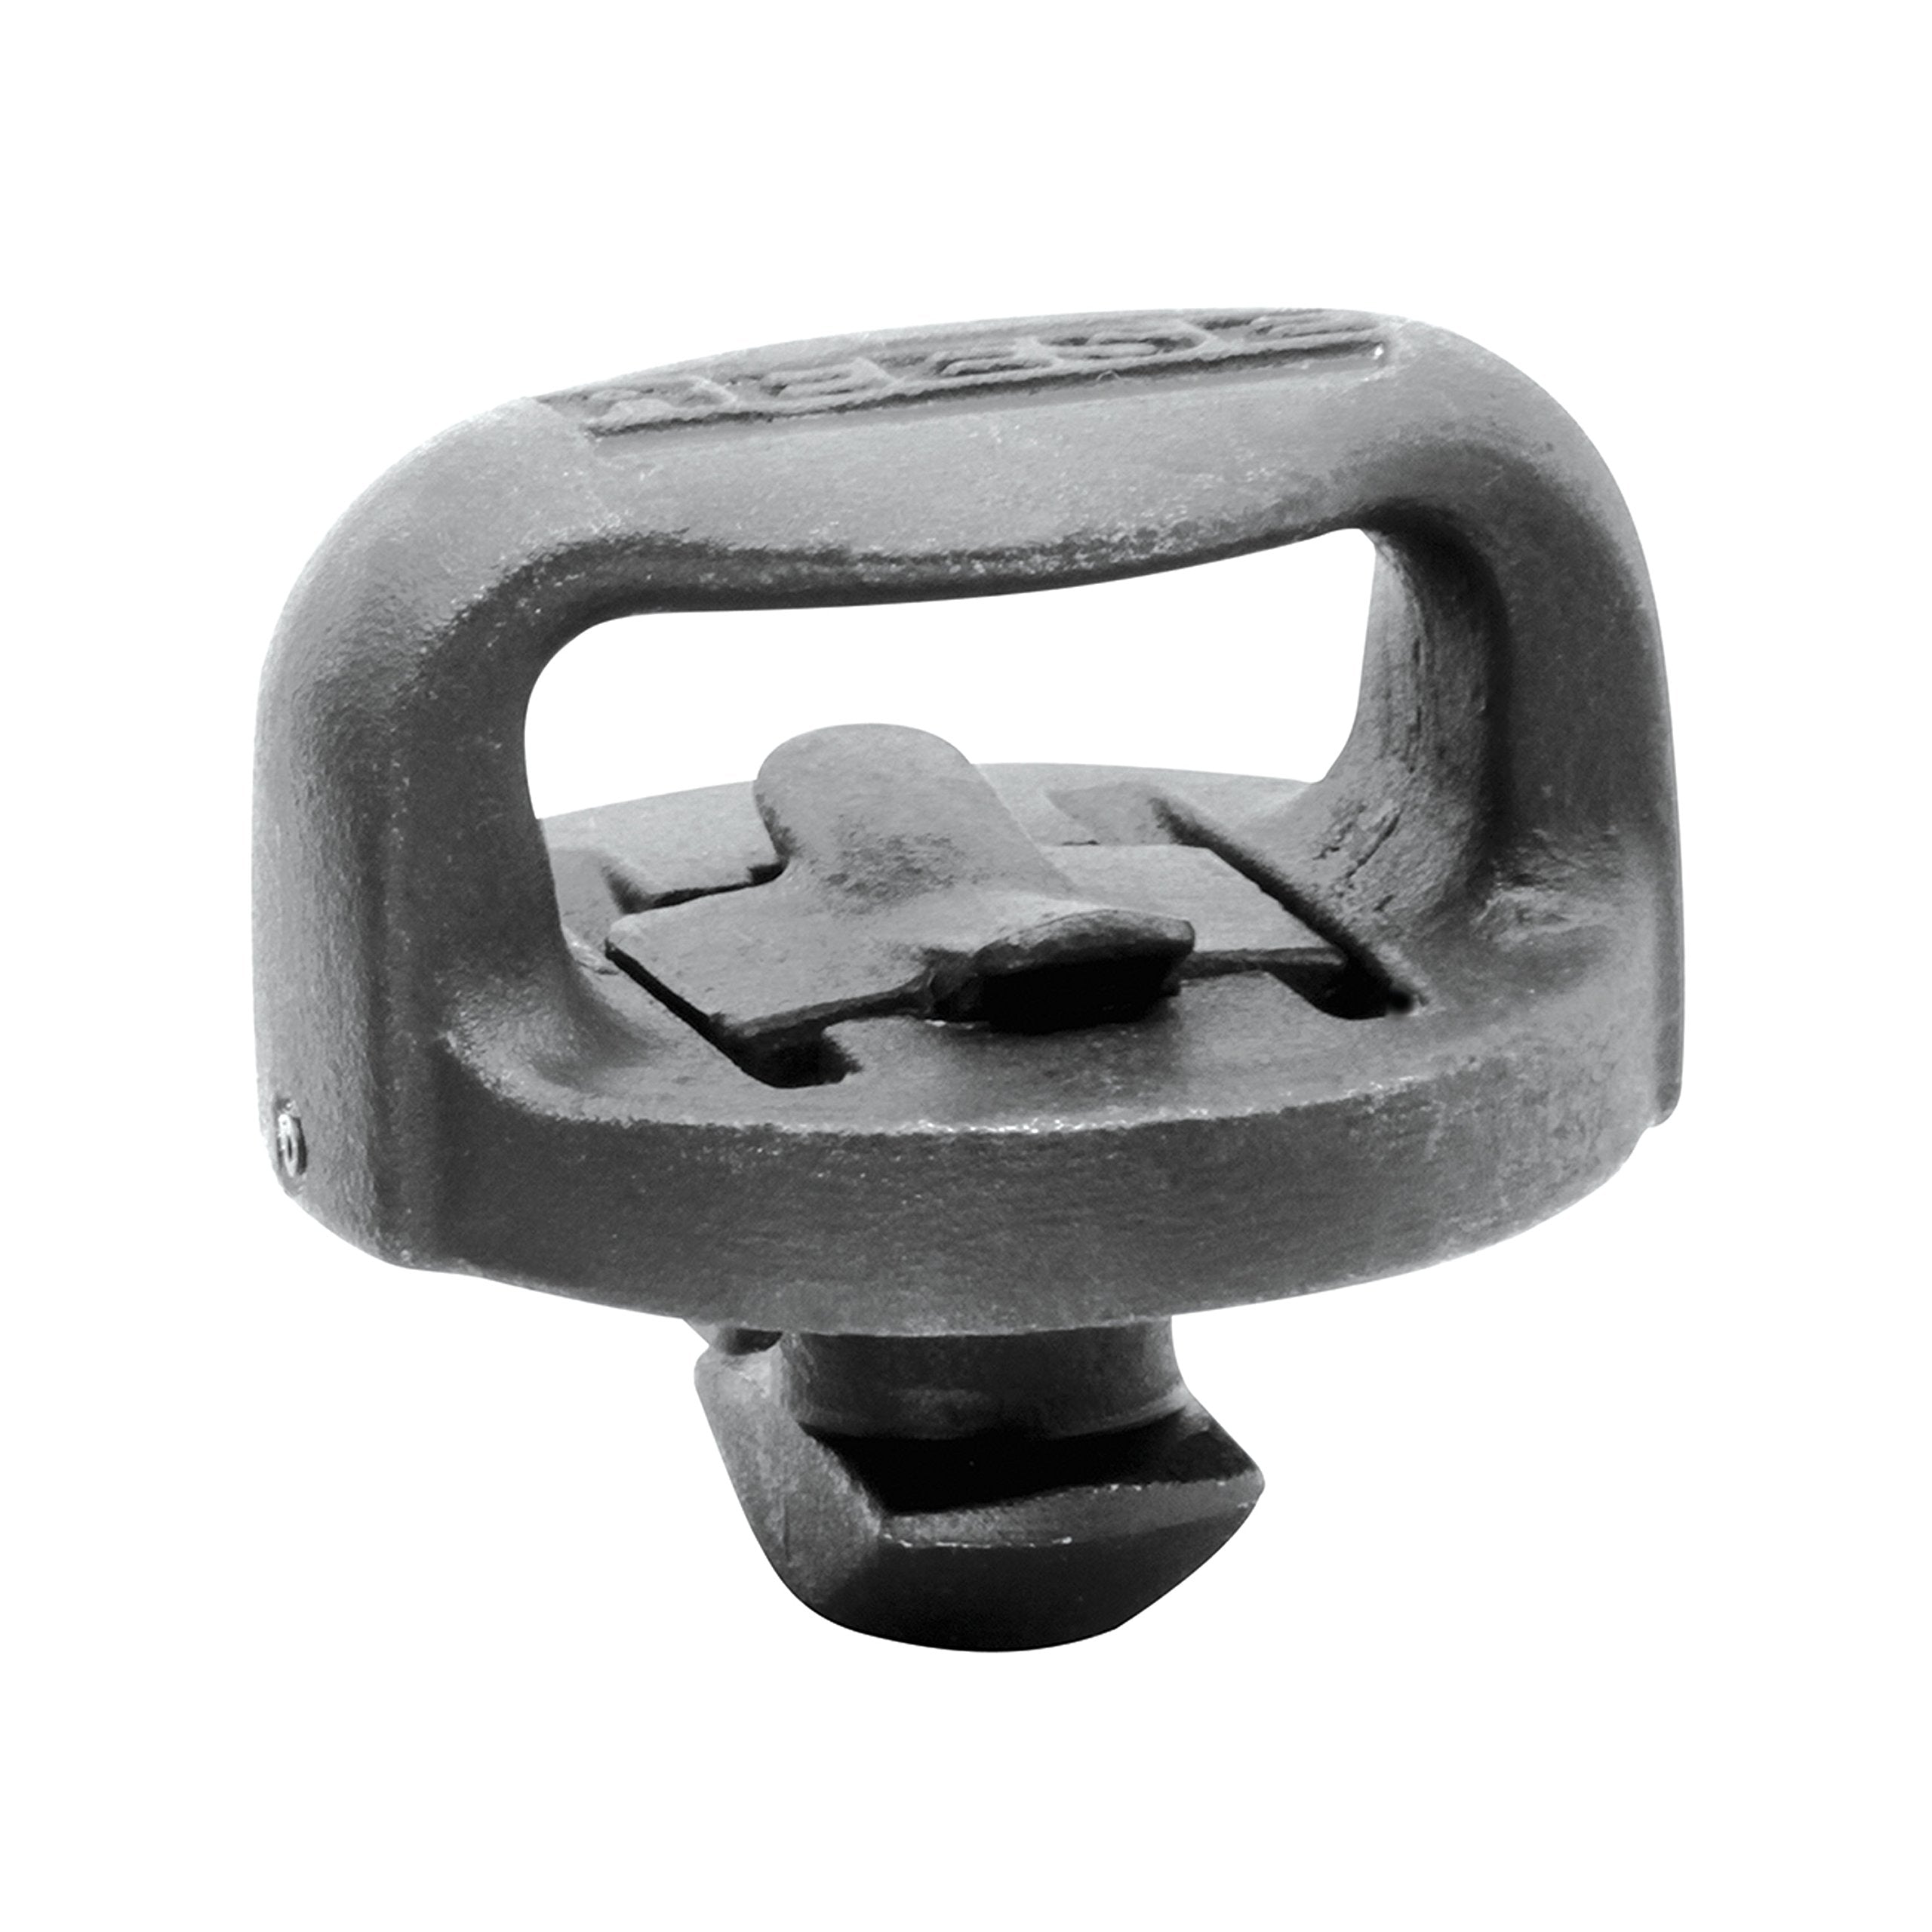 Reese 30134 Reese Safety Chain Attachment for Elite Under-Bed Gooseneck Hitch